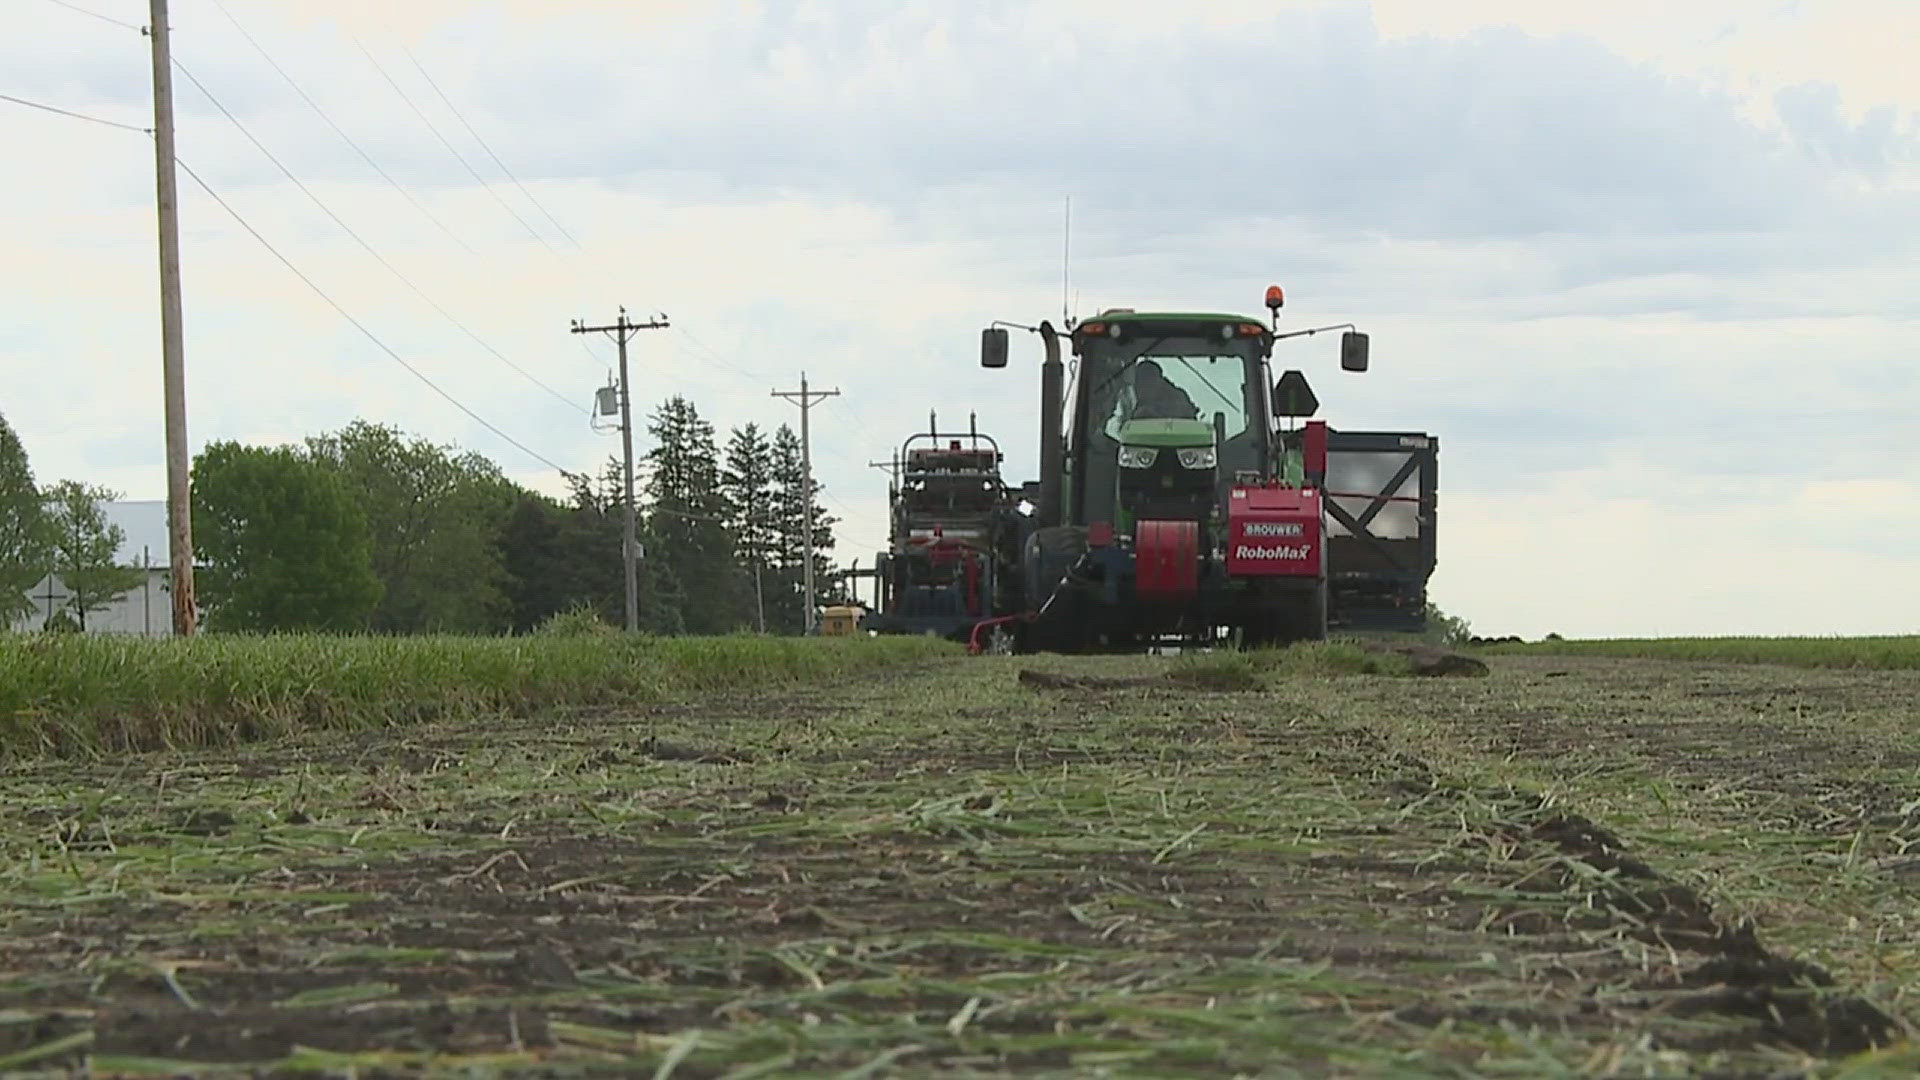 Davenport-based Seven Cities Sod says they've been able to begin harvesting earlier than ever before in their history.